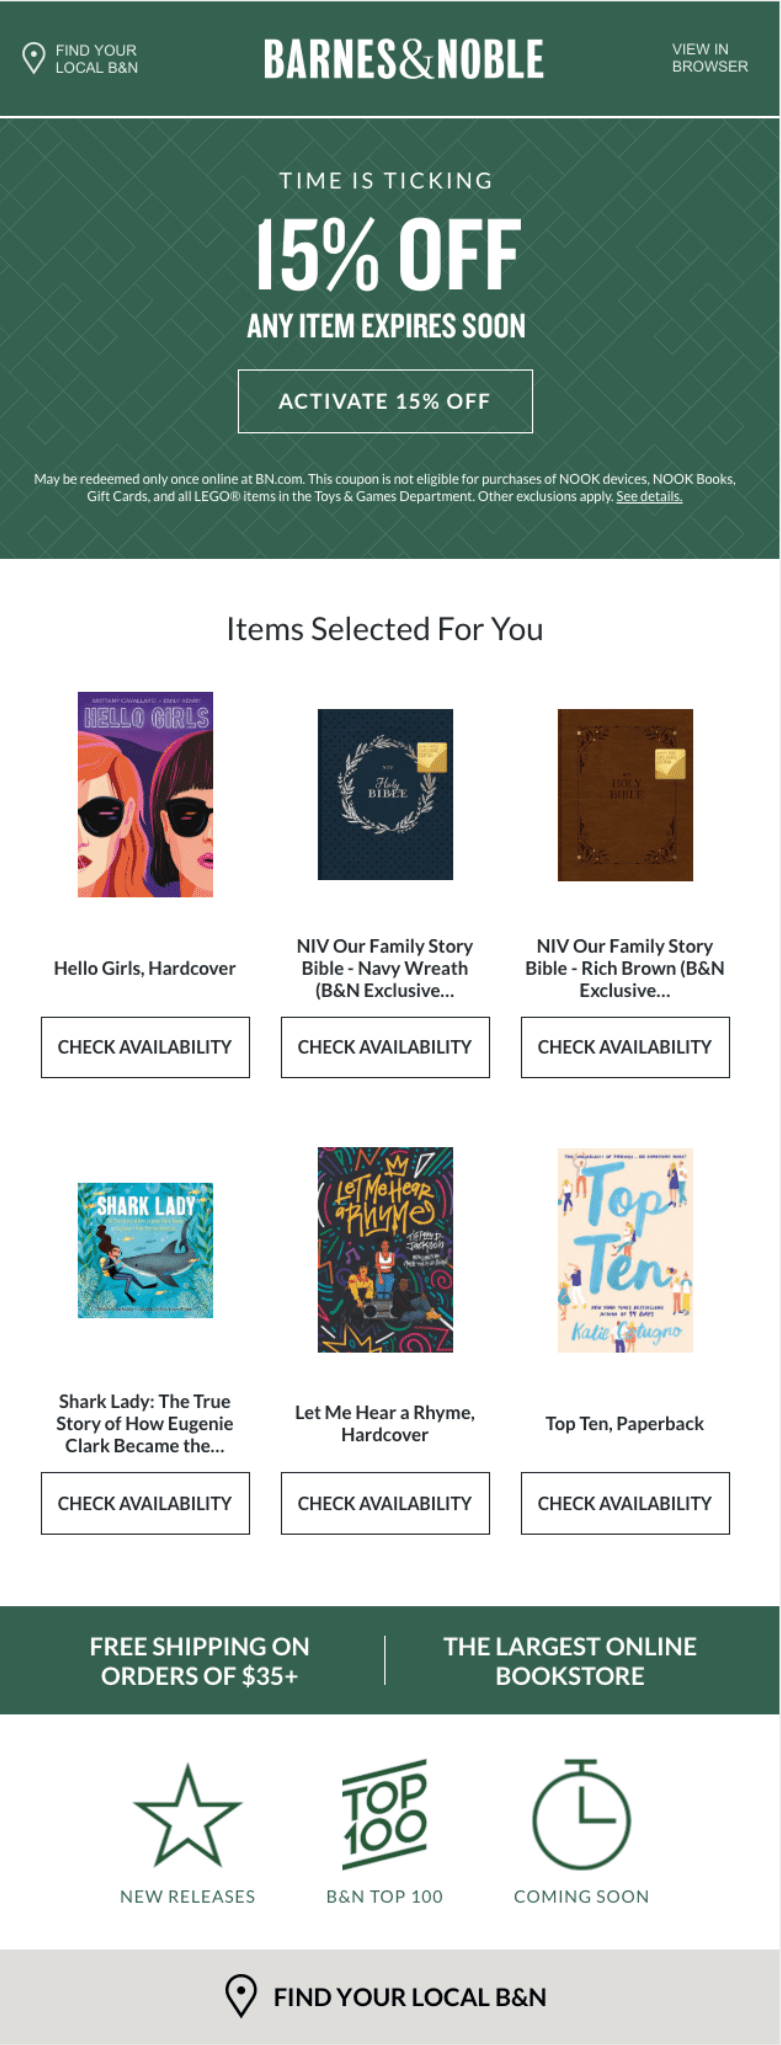 Email newsletter from Barnes and Noble featuring personalized product recommendations.